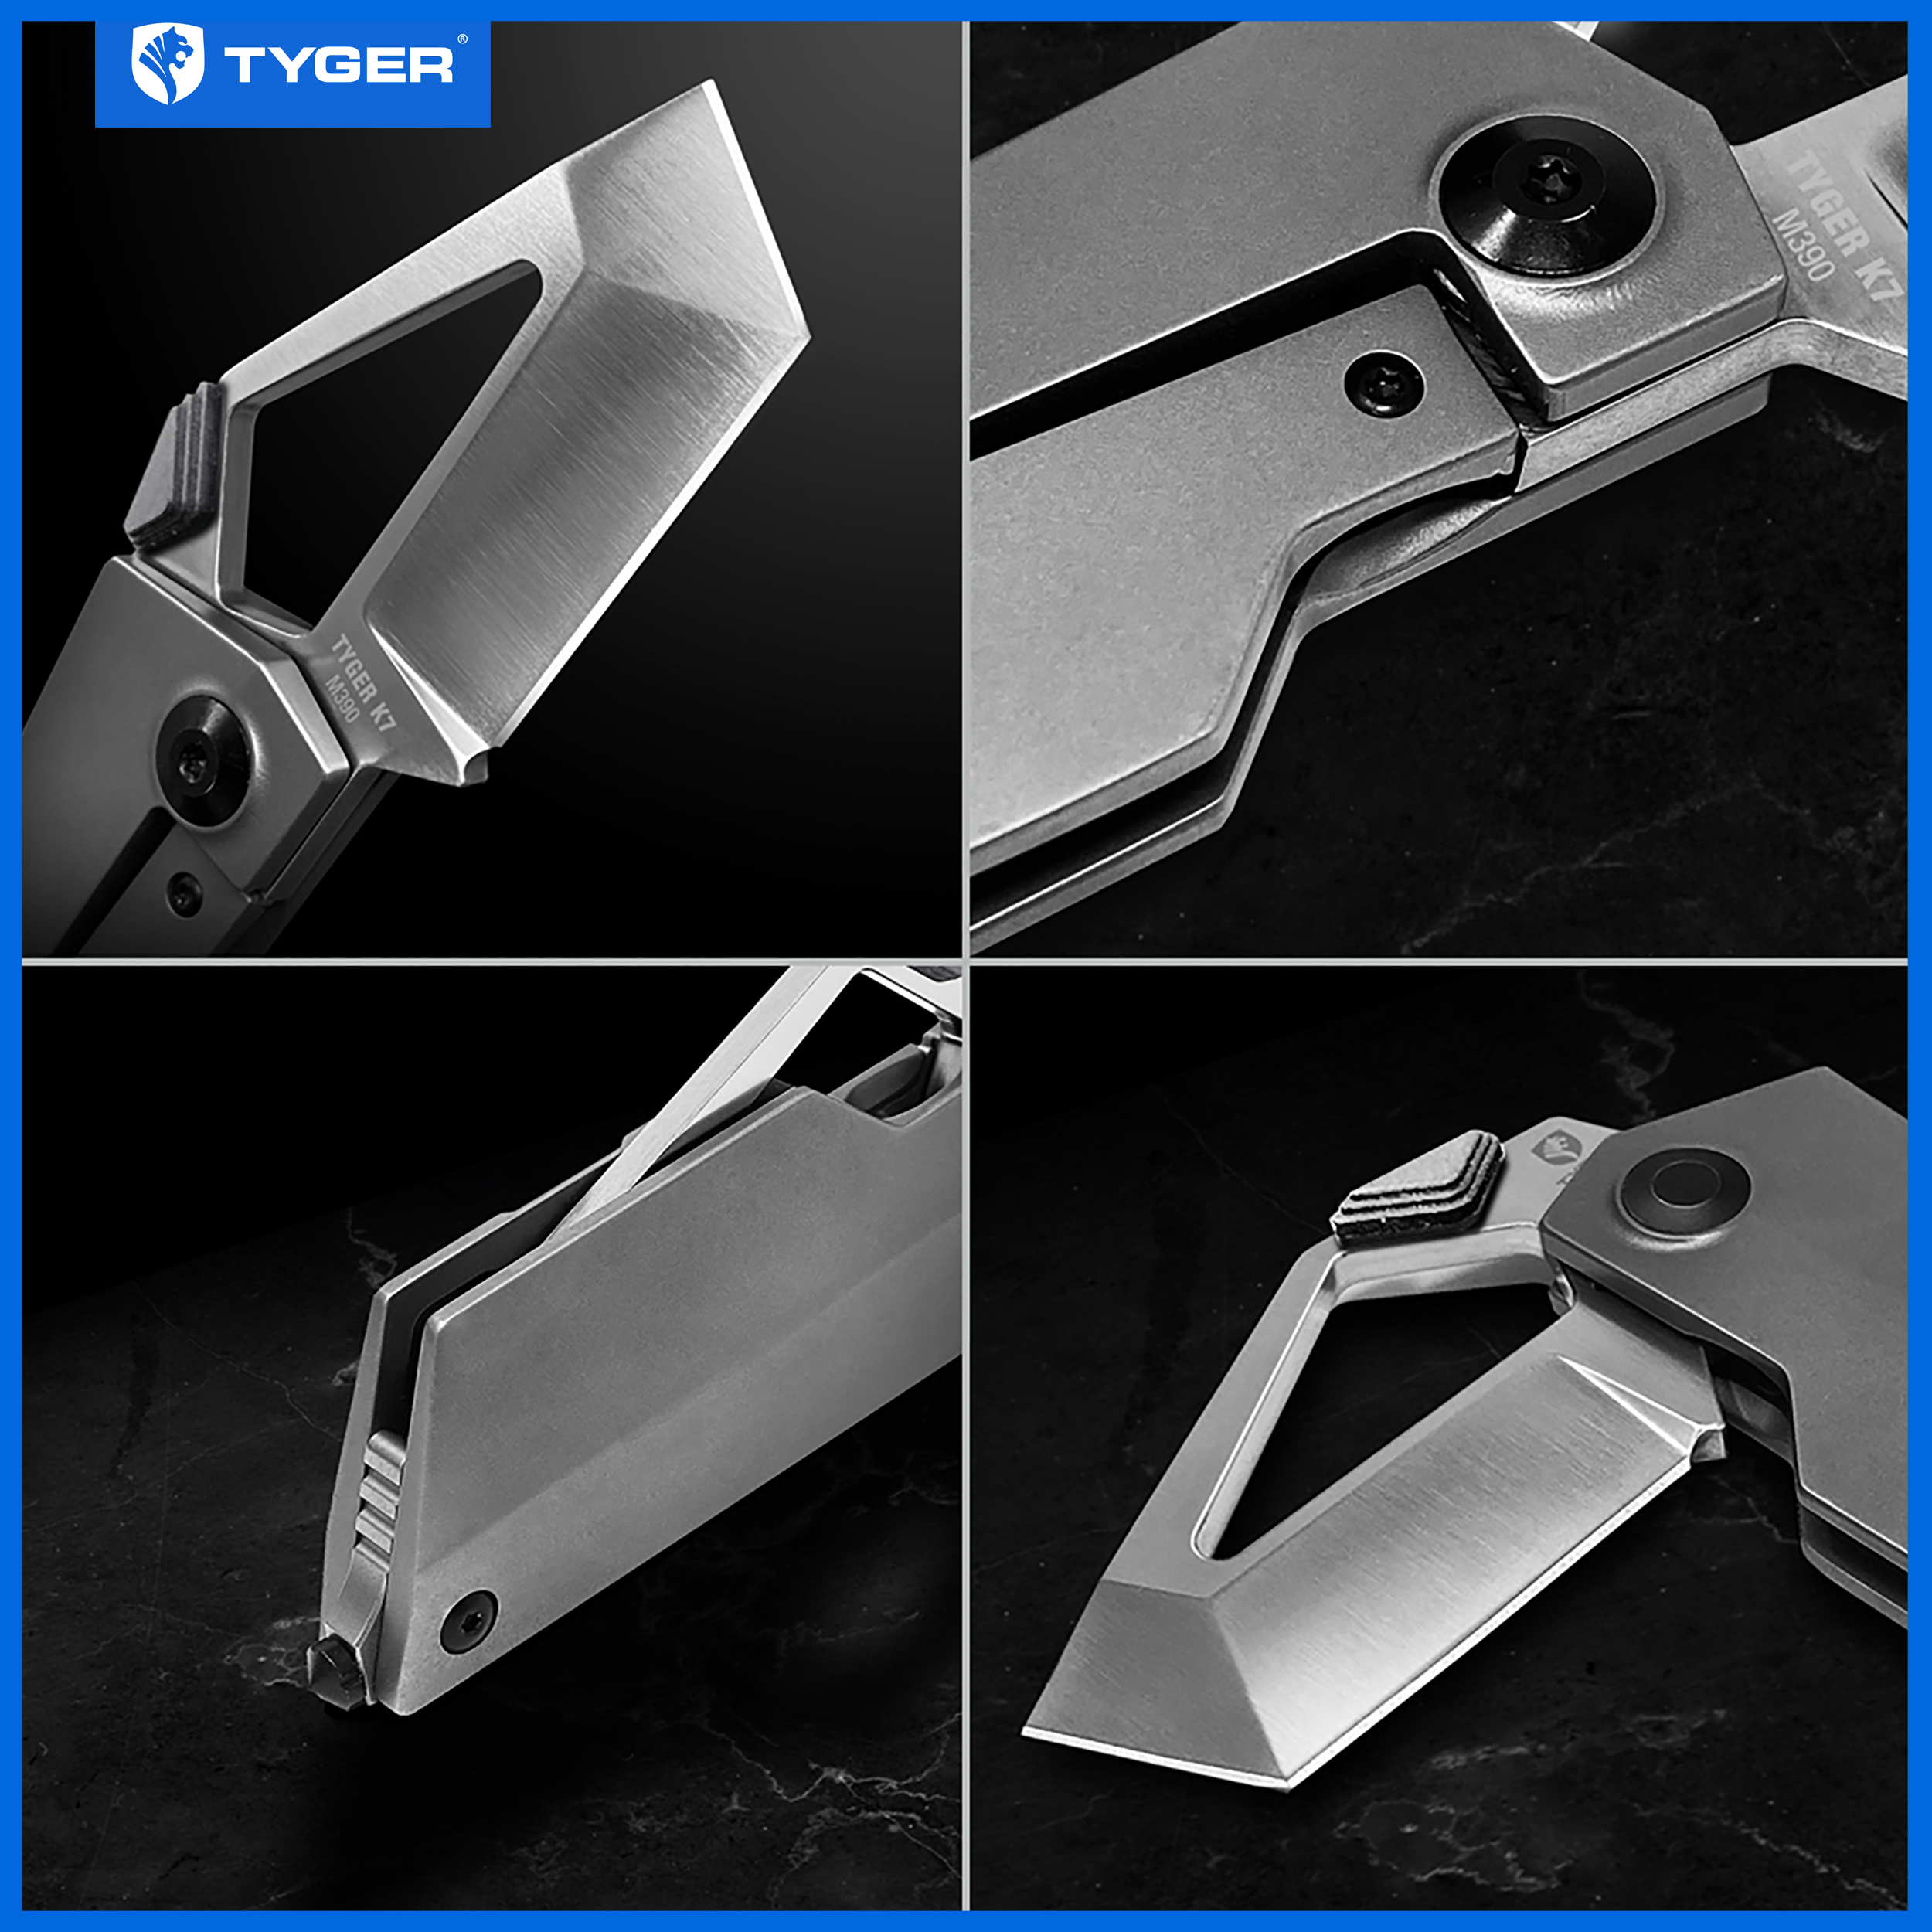 WE Knife Cybernetic New Product Overview 